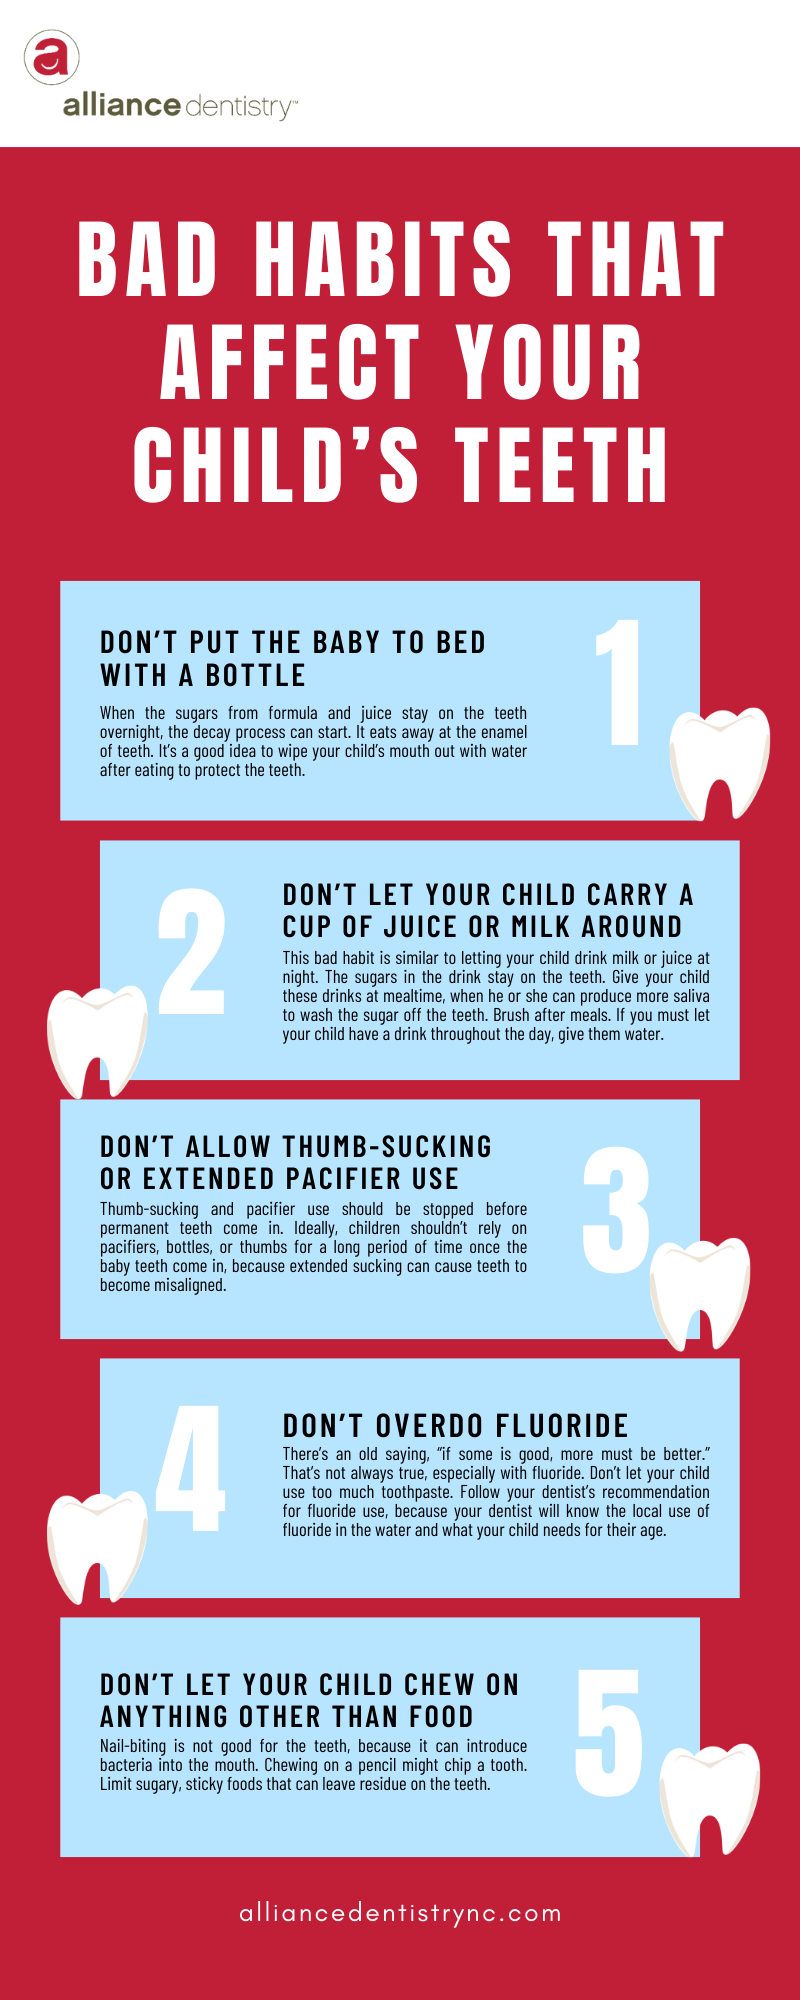 BAD HABITS THAT AFFECT YOUR CHILD'S TEETH INFOGRAPHIC